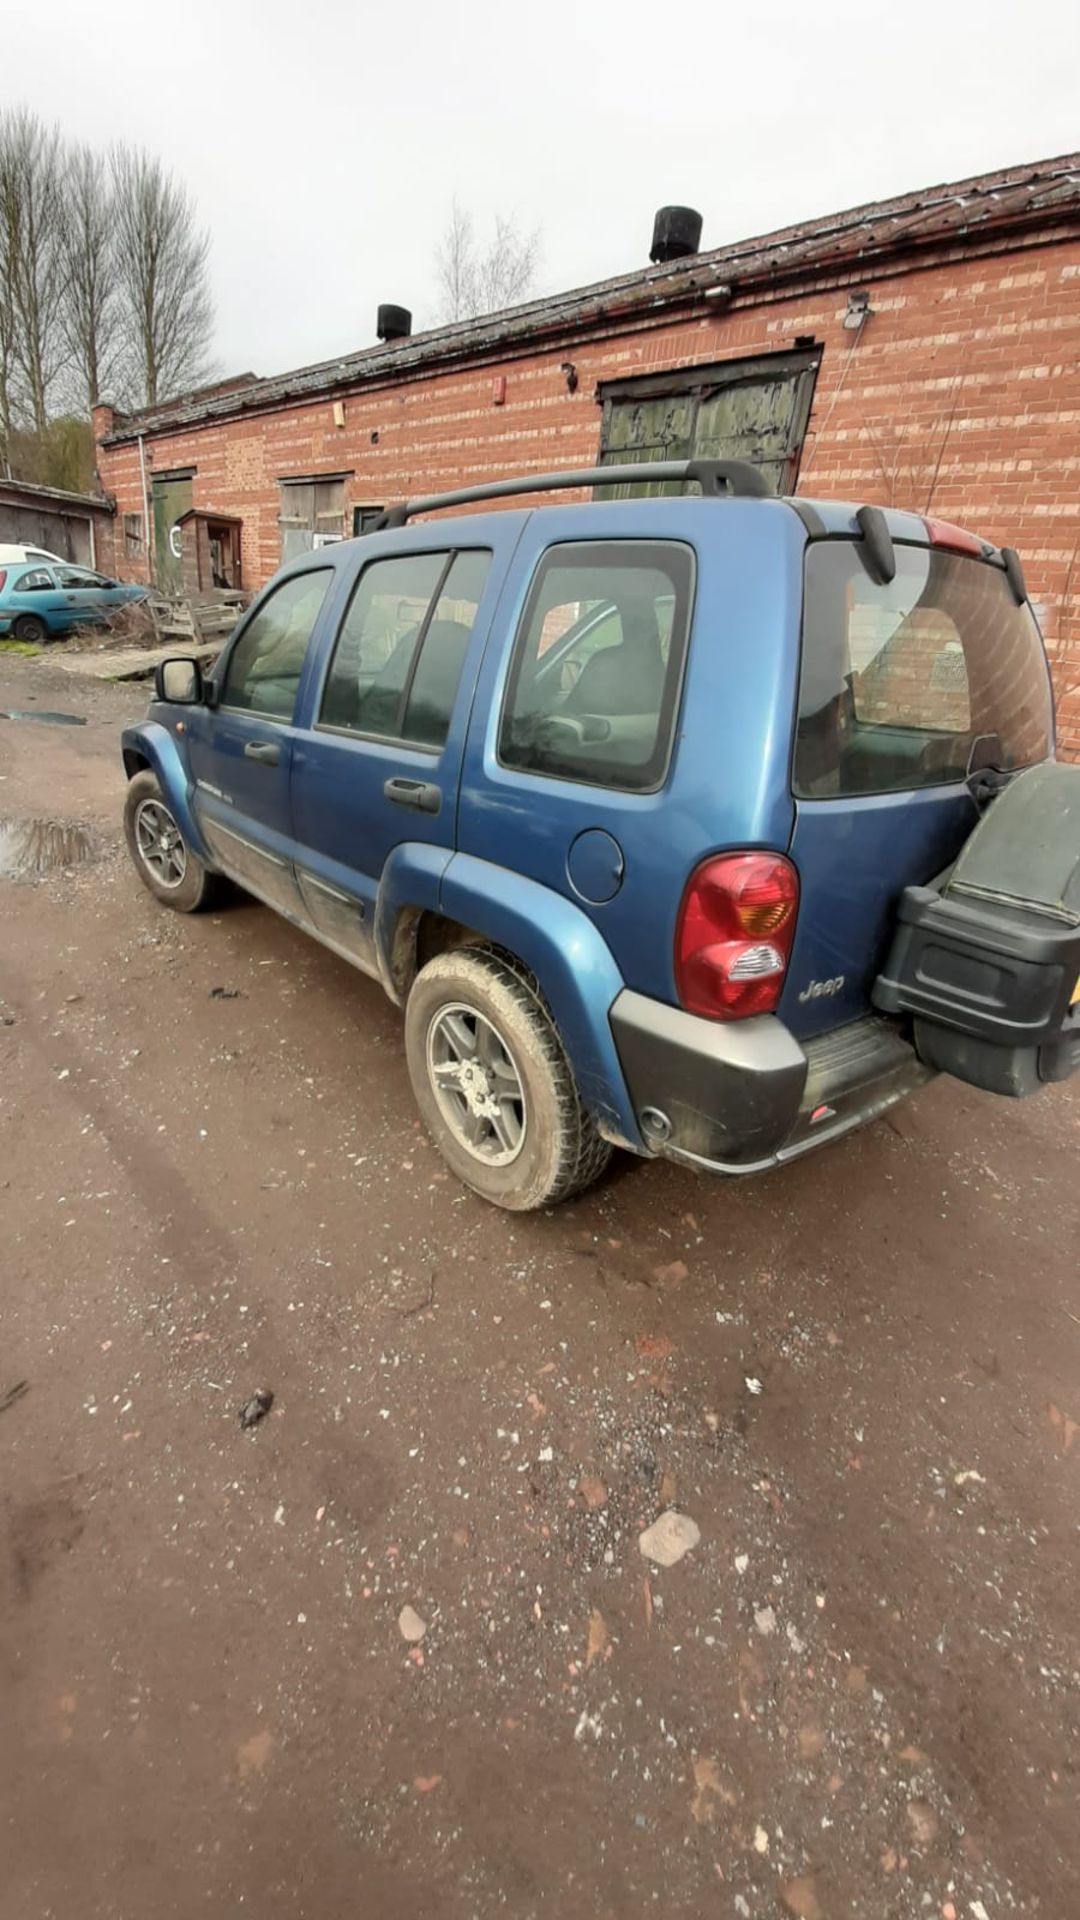 2004 JEEP CHEROKEE EXTREME SPORT A BLUE ESTATE, SHOWING 139,091 MILES, AUTO 4 GEARS *NO VAT* - Image 2 of 11